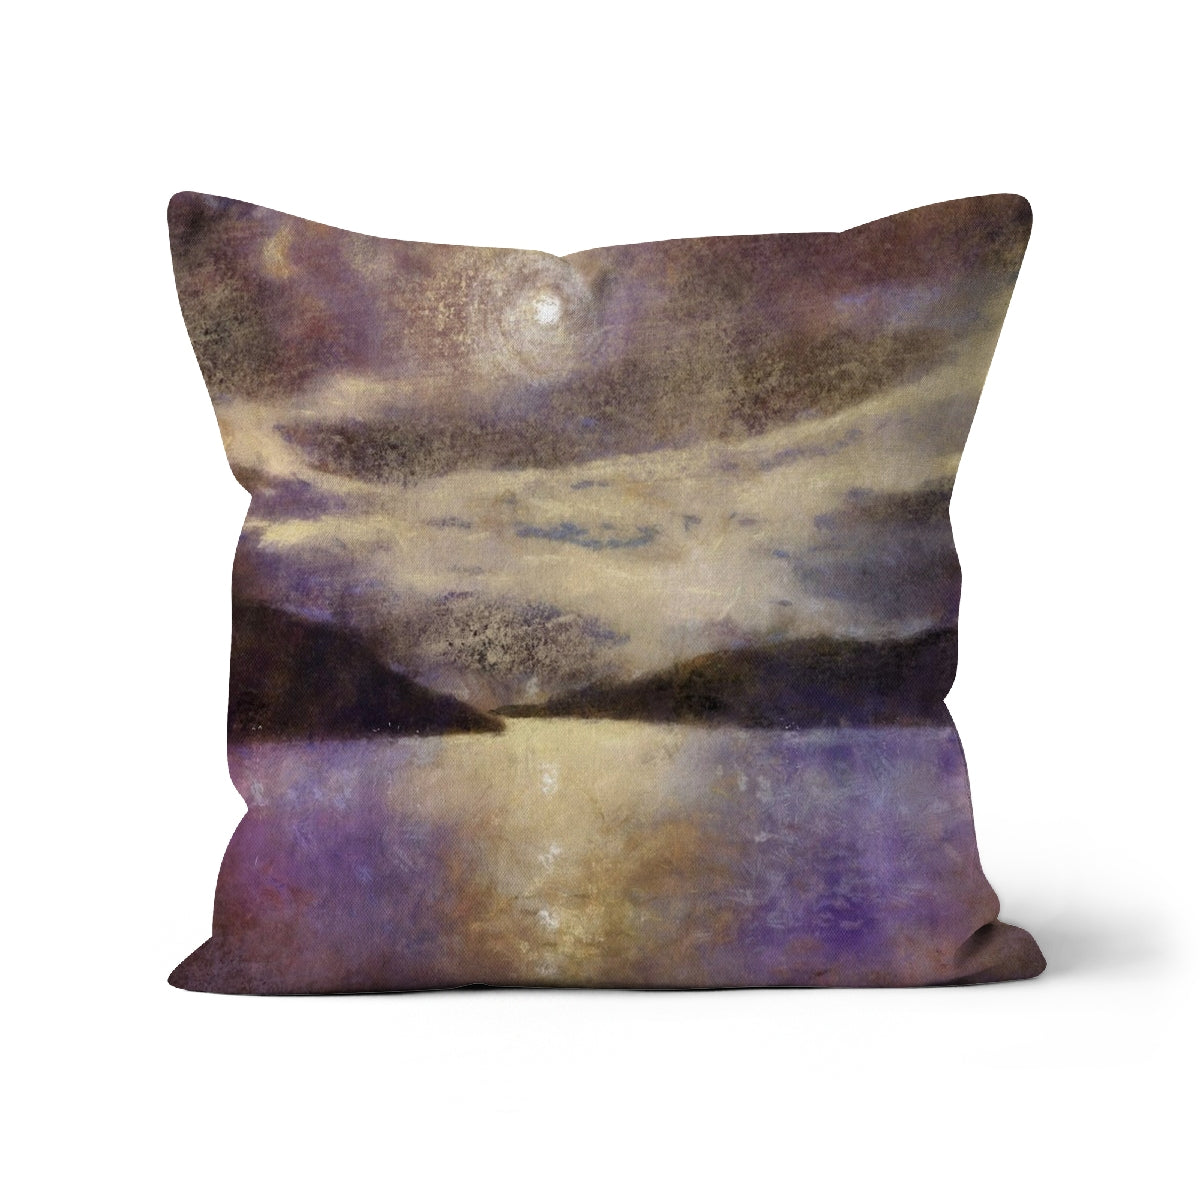 Moonlight Meets Lewis & Harris Art Gifts Cushion-Cushions-Hebridean Islands Art Gallery-Canvas-22"x22"-Paintings, Prints, Homeware, Art Gifts From Scotland By Scottish Artist Kevin Hunter